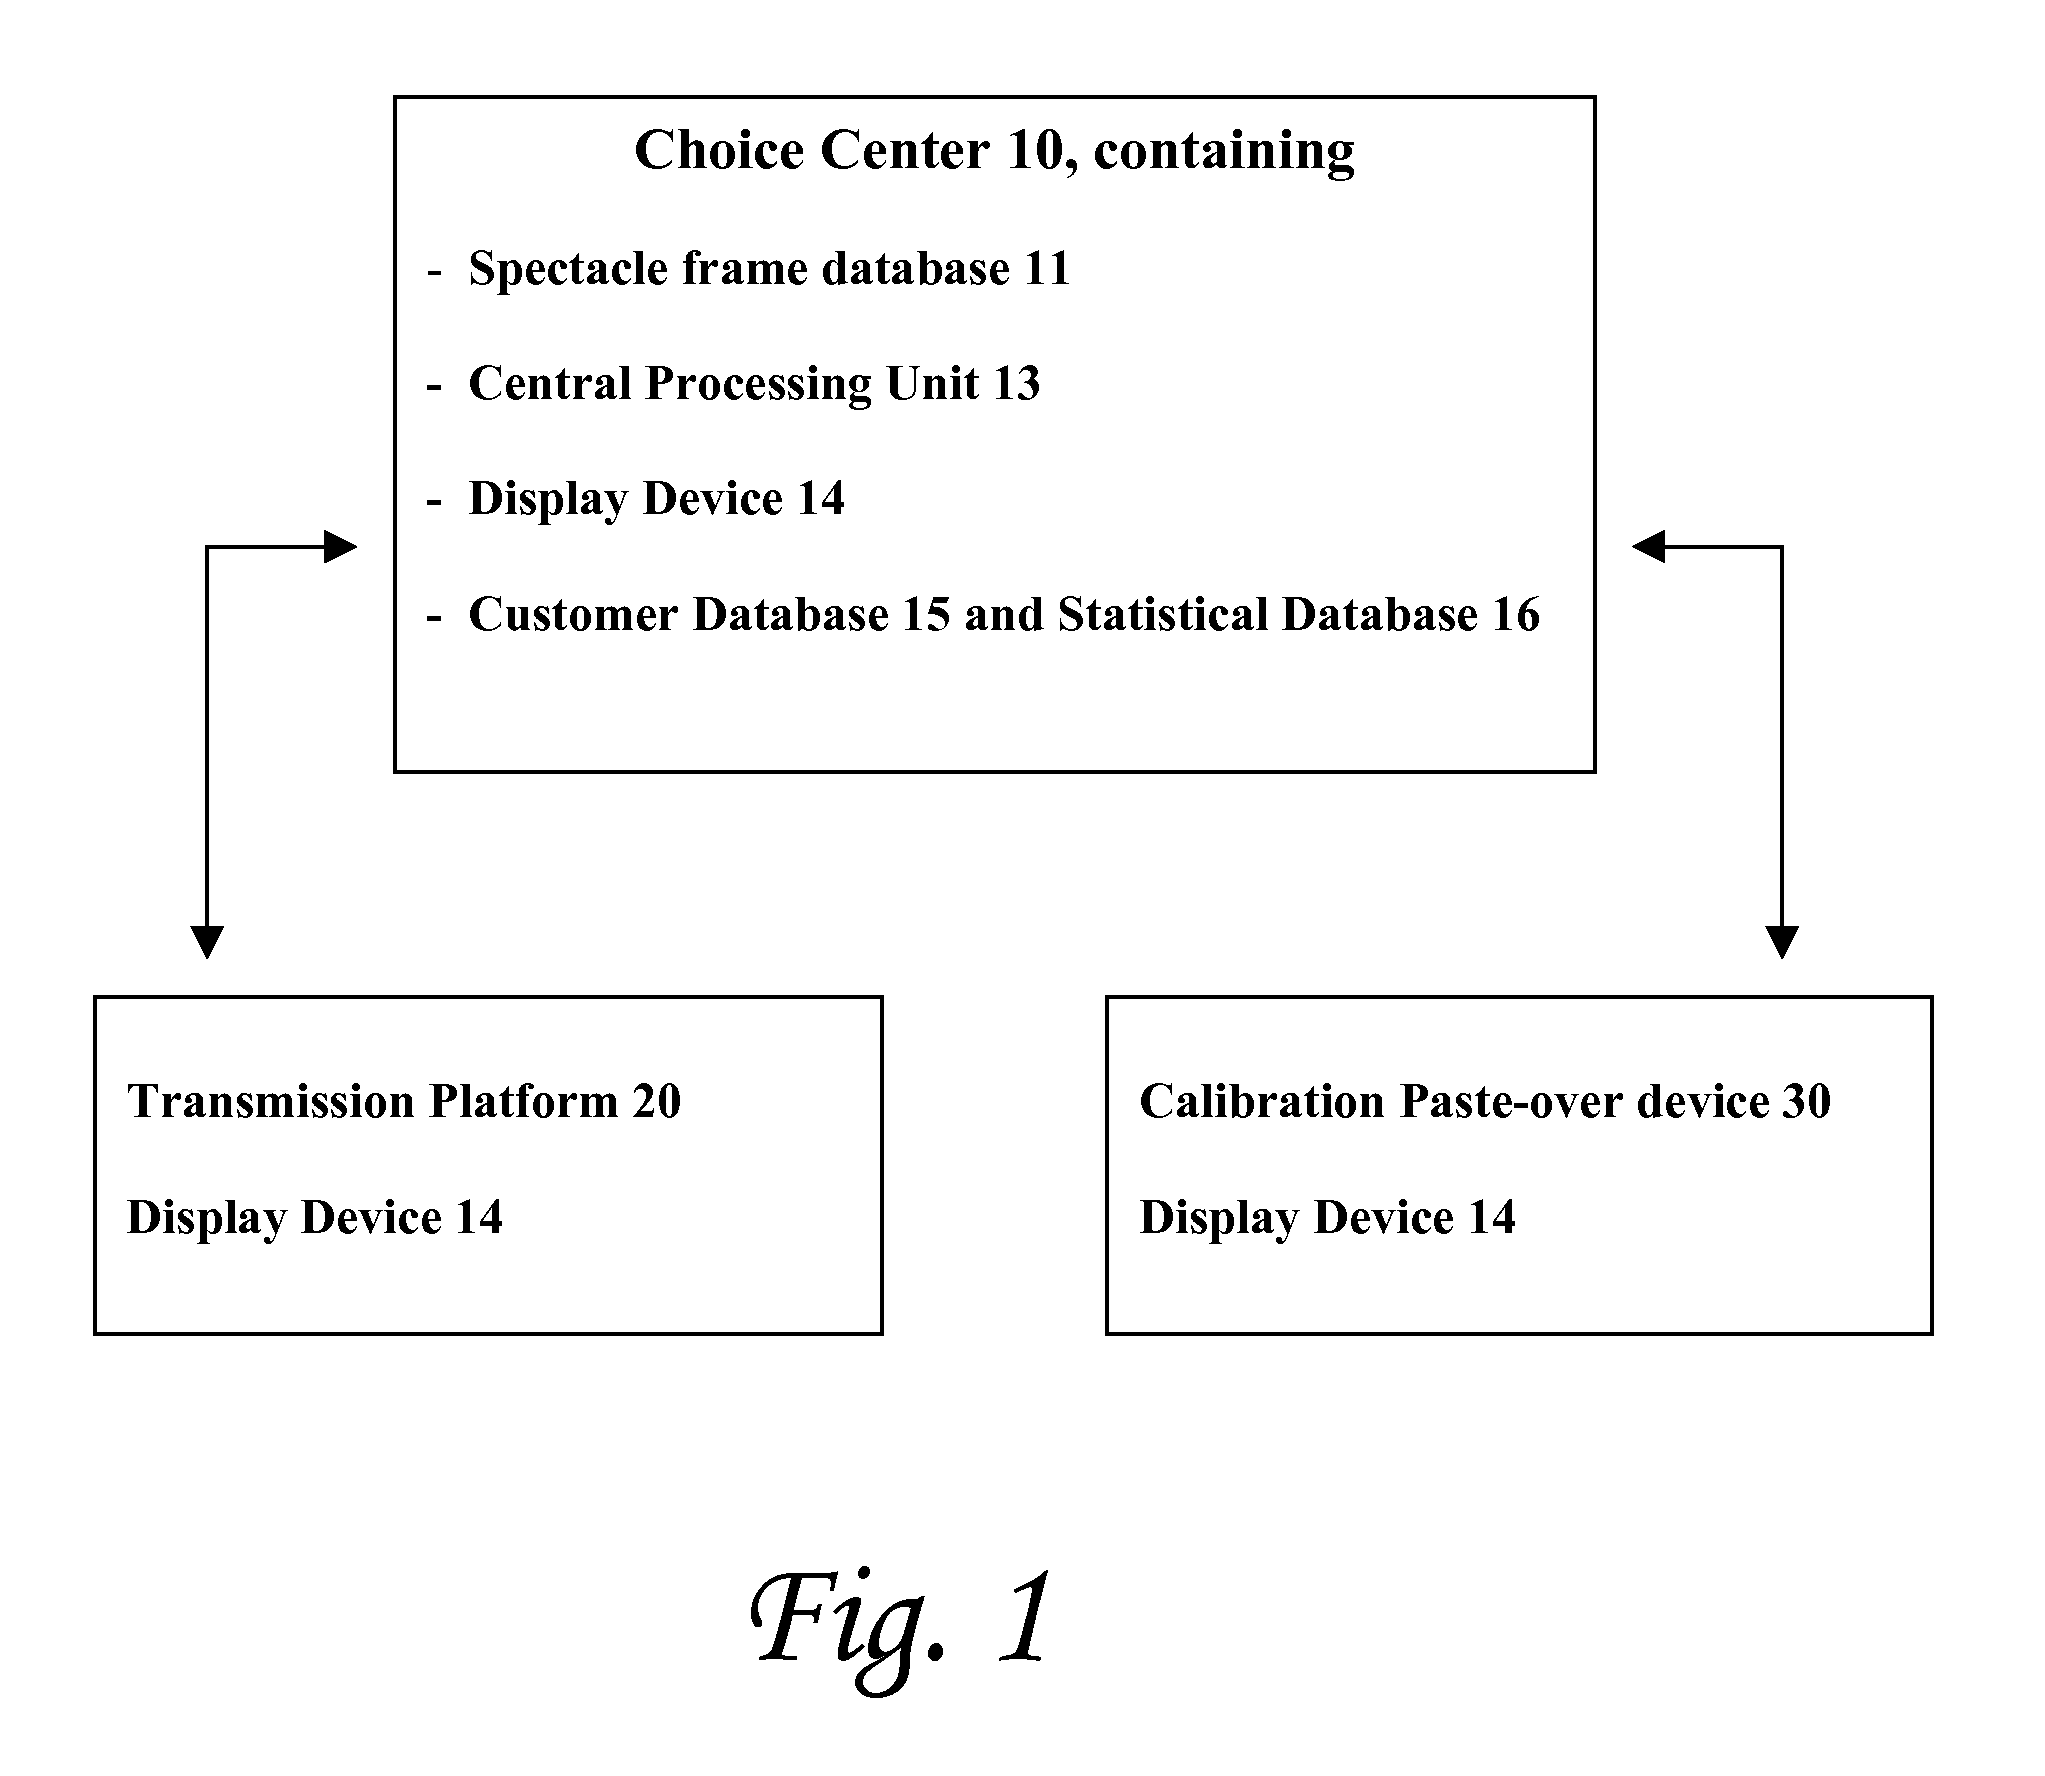 Method and the associate mechanism for stored-image database-driven spectacle frame fitting services over public network